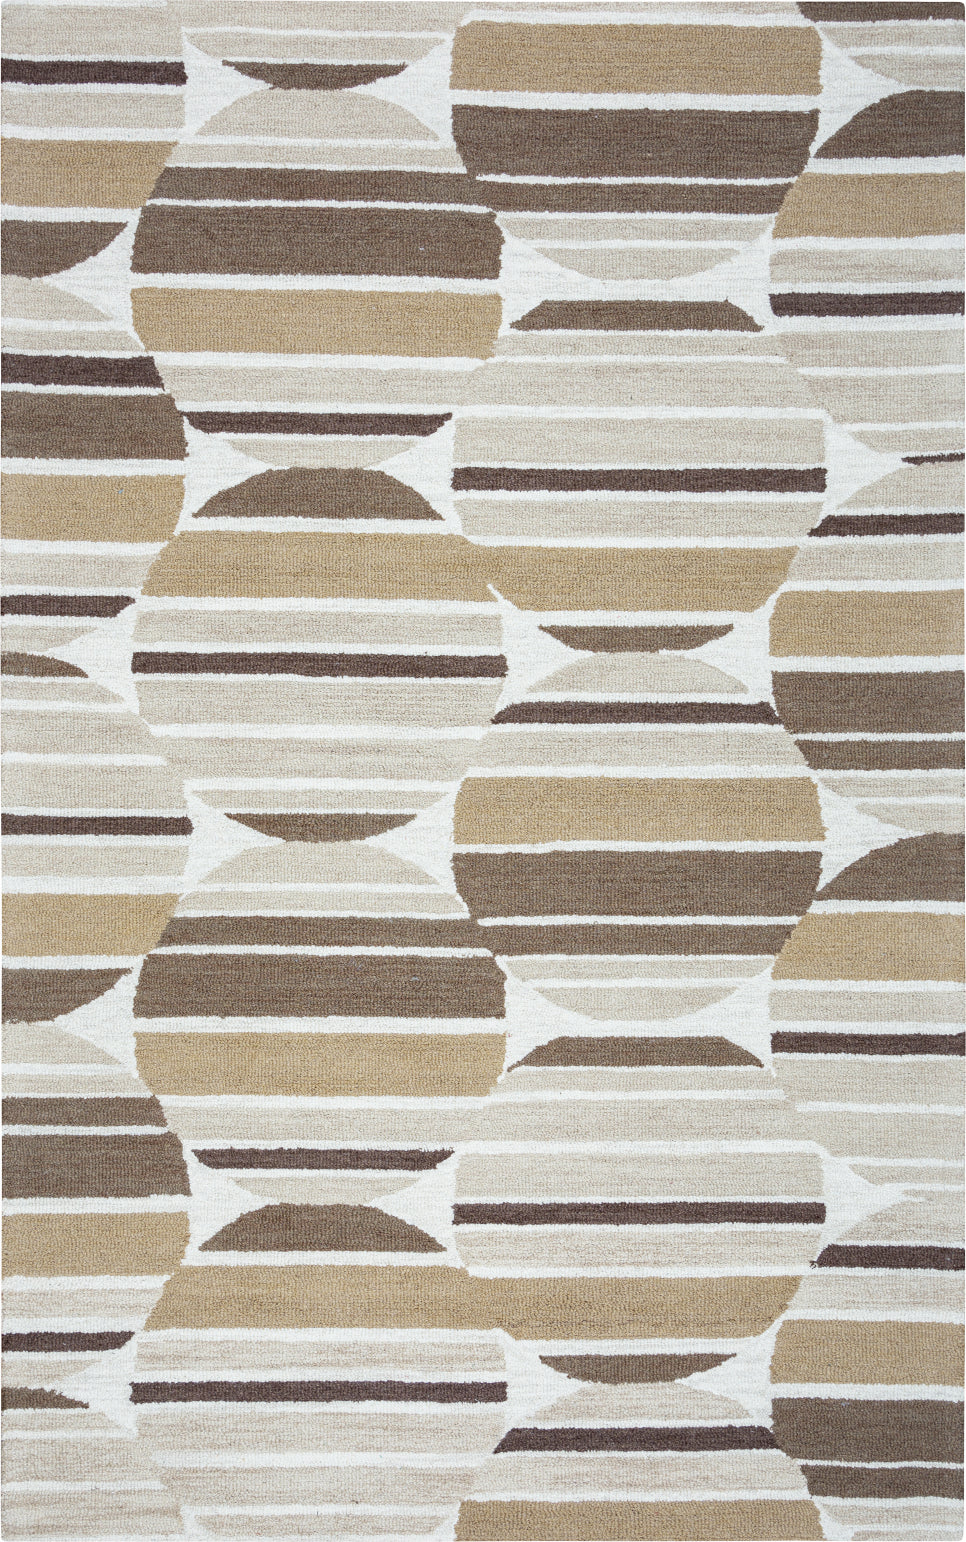 Rizzy Arden Loft-Easley Meadow EM9419 Natural Area Rug main image